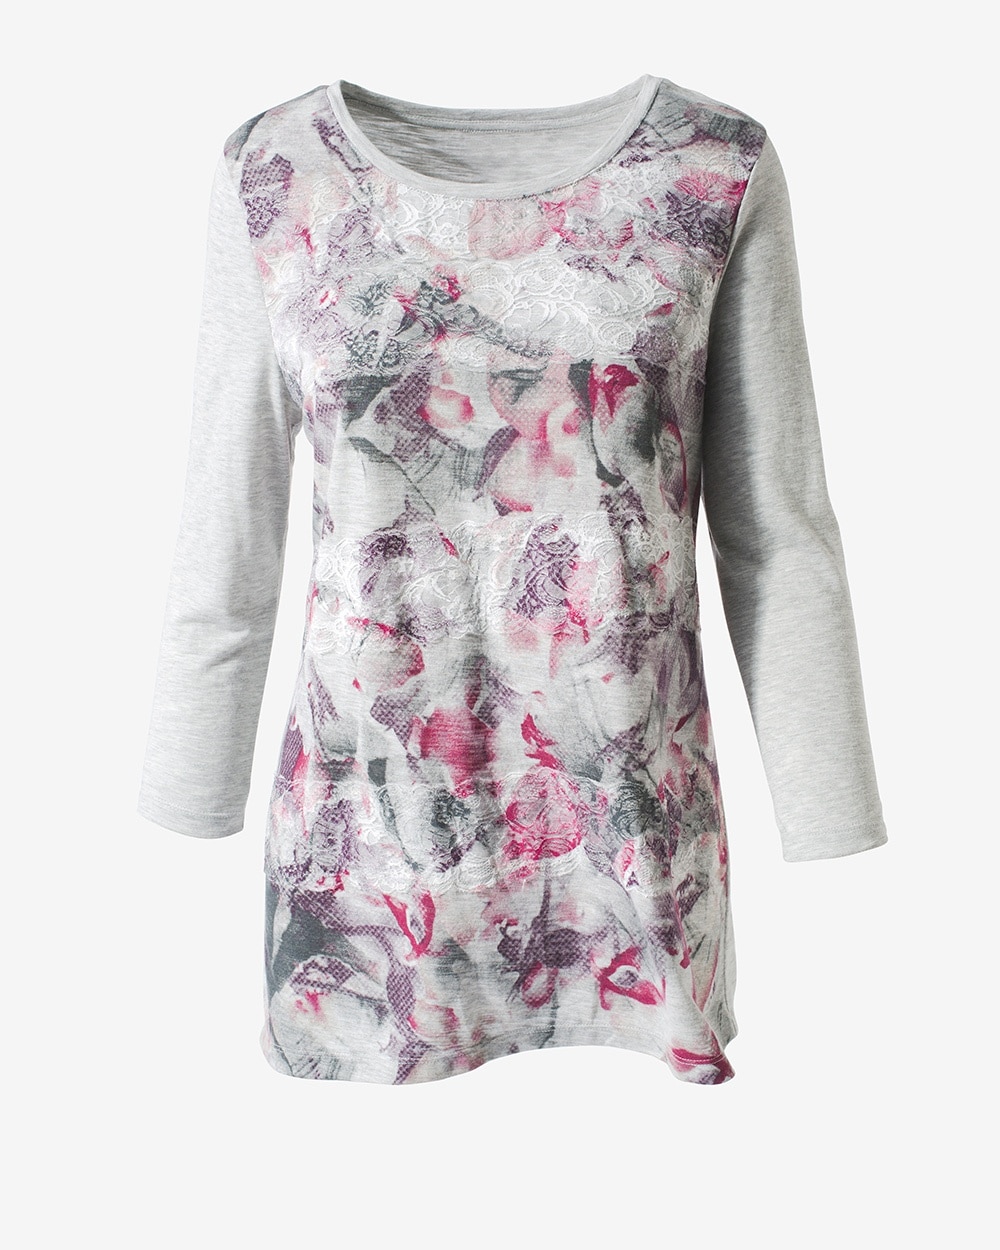 Floral On Lace Scoop-Neck Tunic